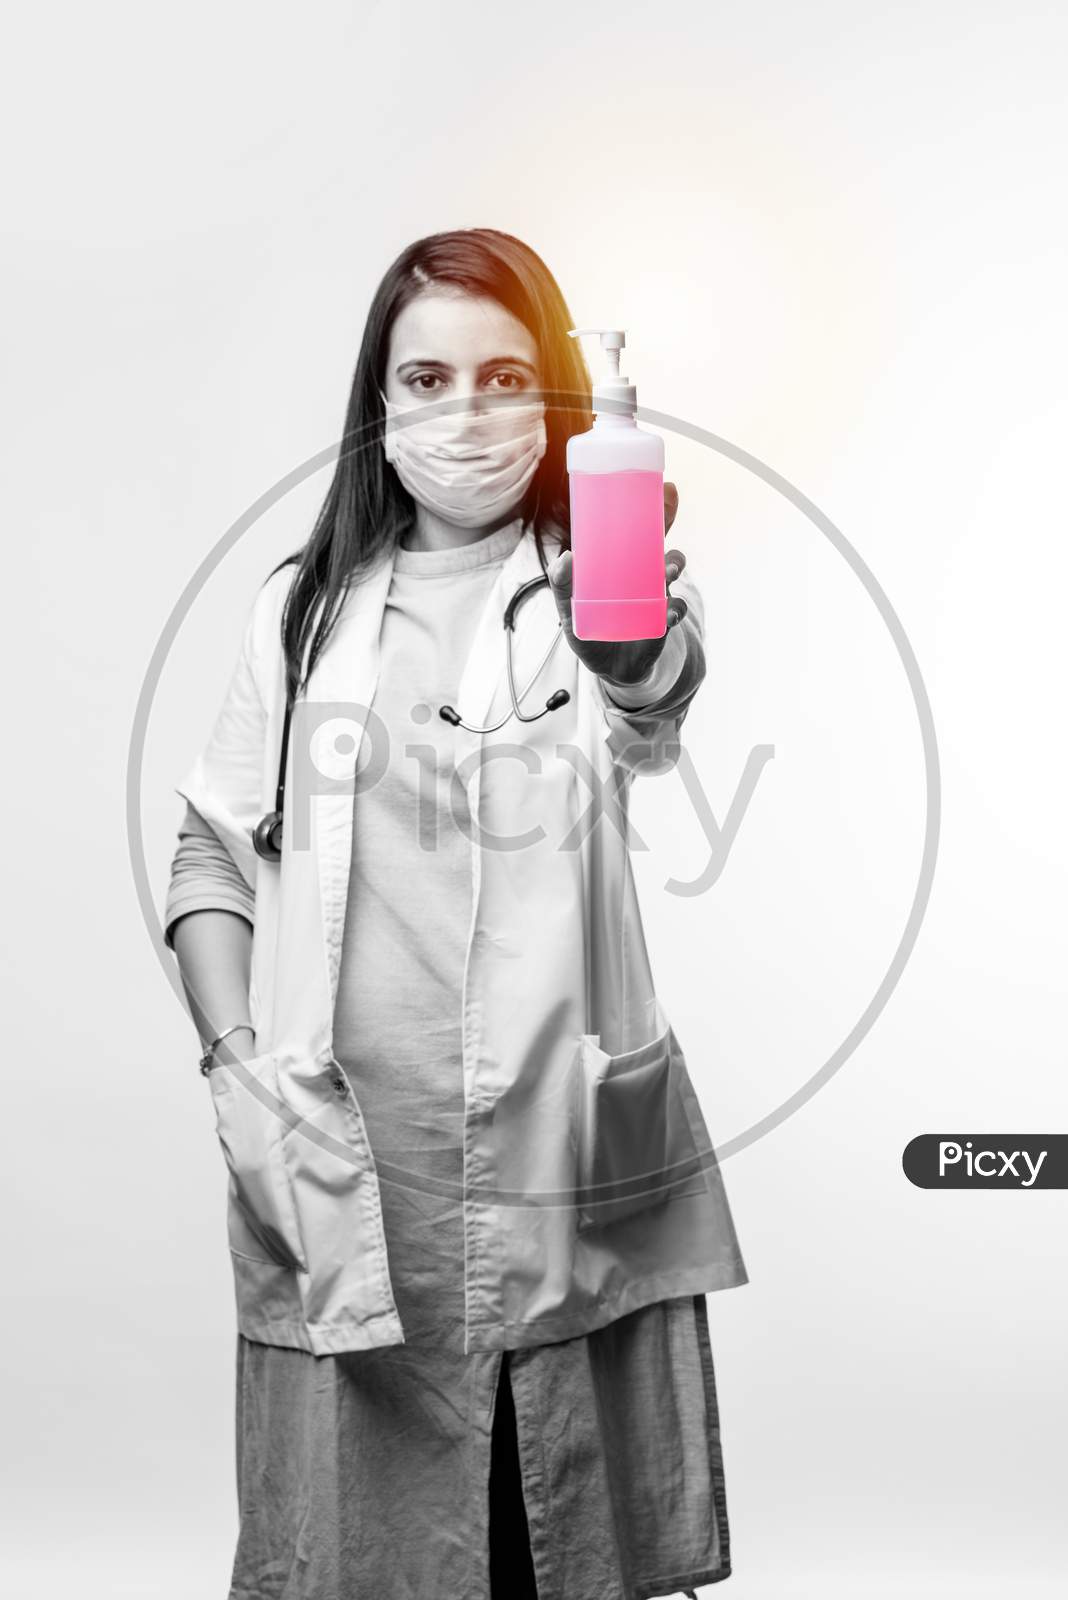 Indian Female Doctor In Uniform And Face Mask Using Sanitizer Or Disinfectant Spray